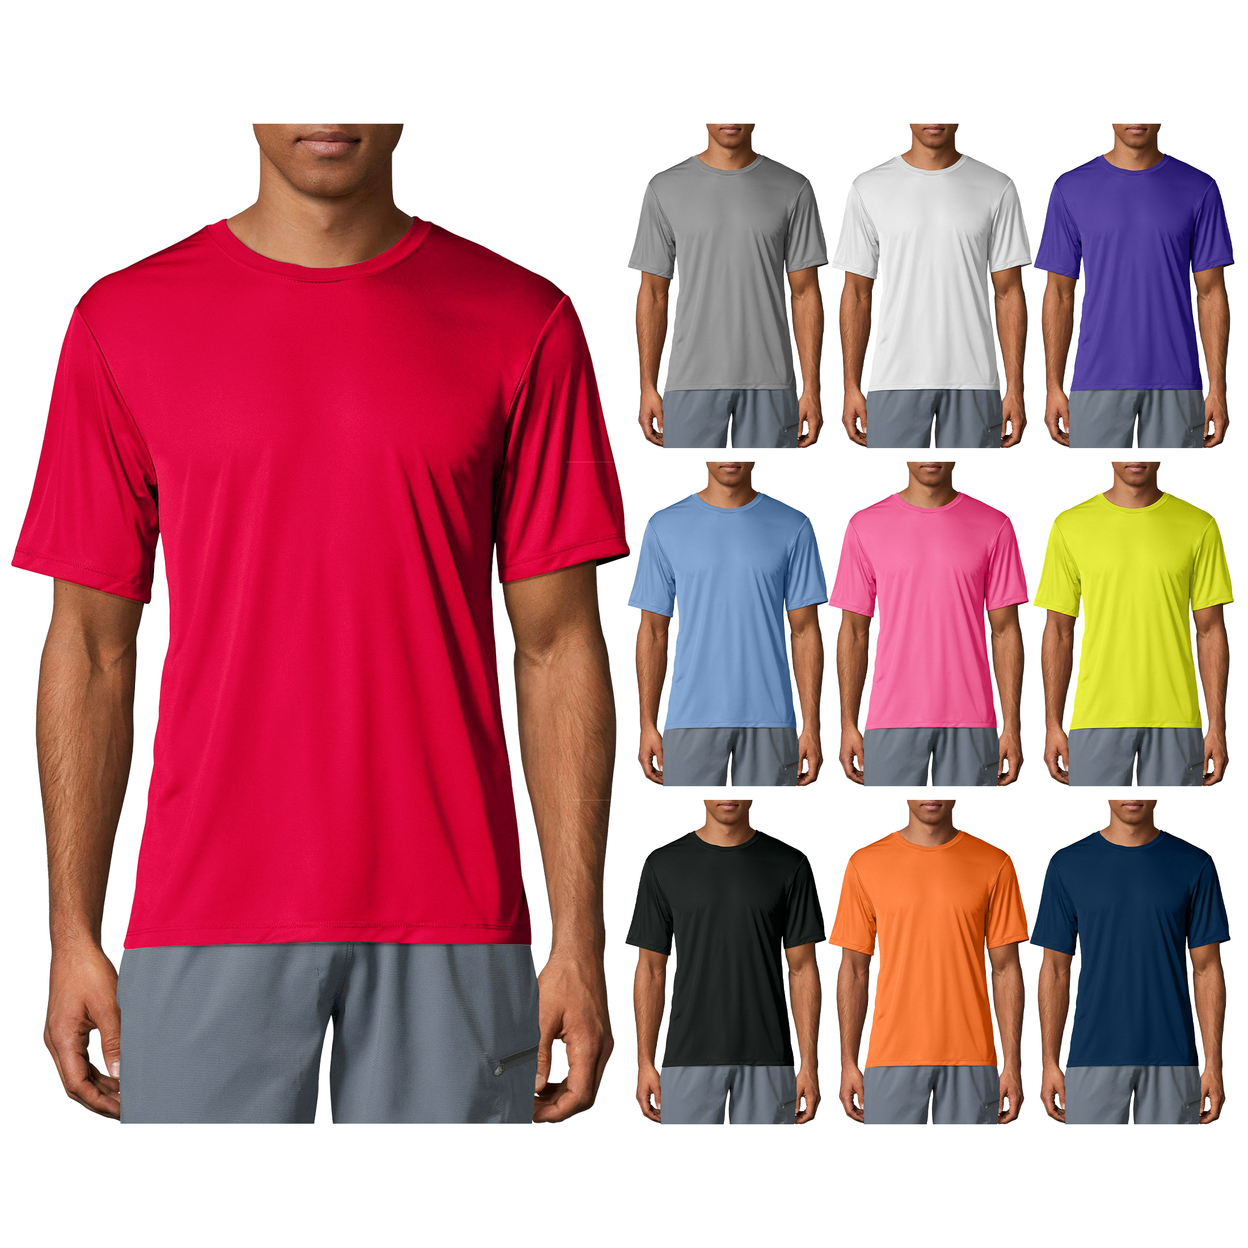 3-Pack: Men's Moisture Wicking Cool Dri-Fit Performance Short Sleeve Crew Neck T-Shirts - Large